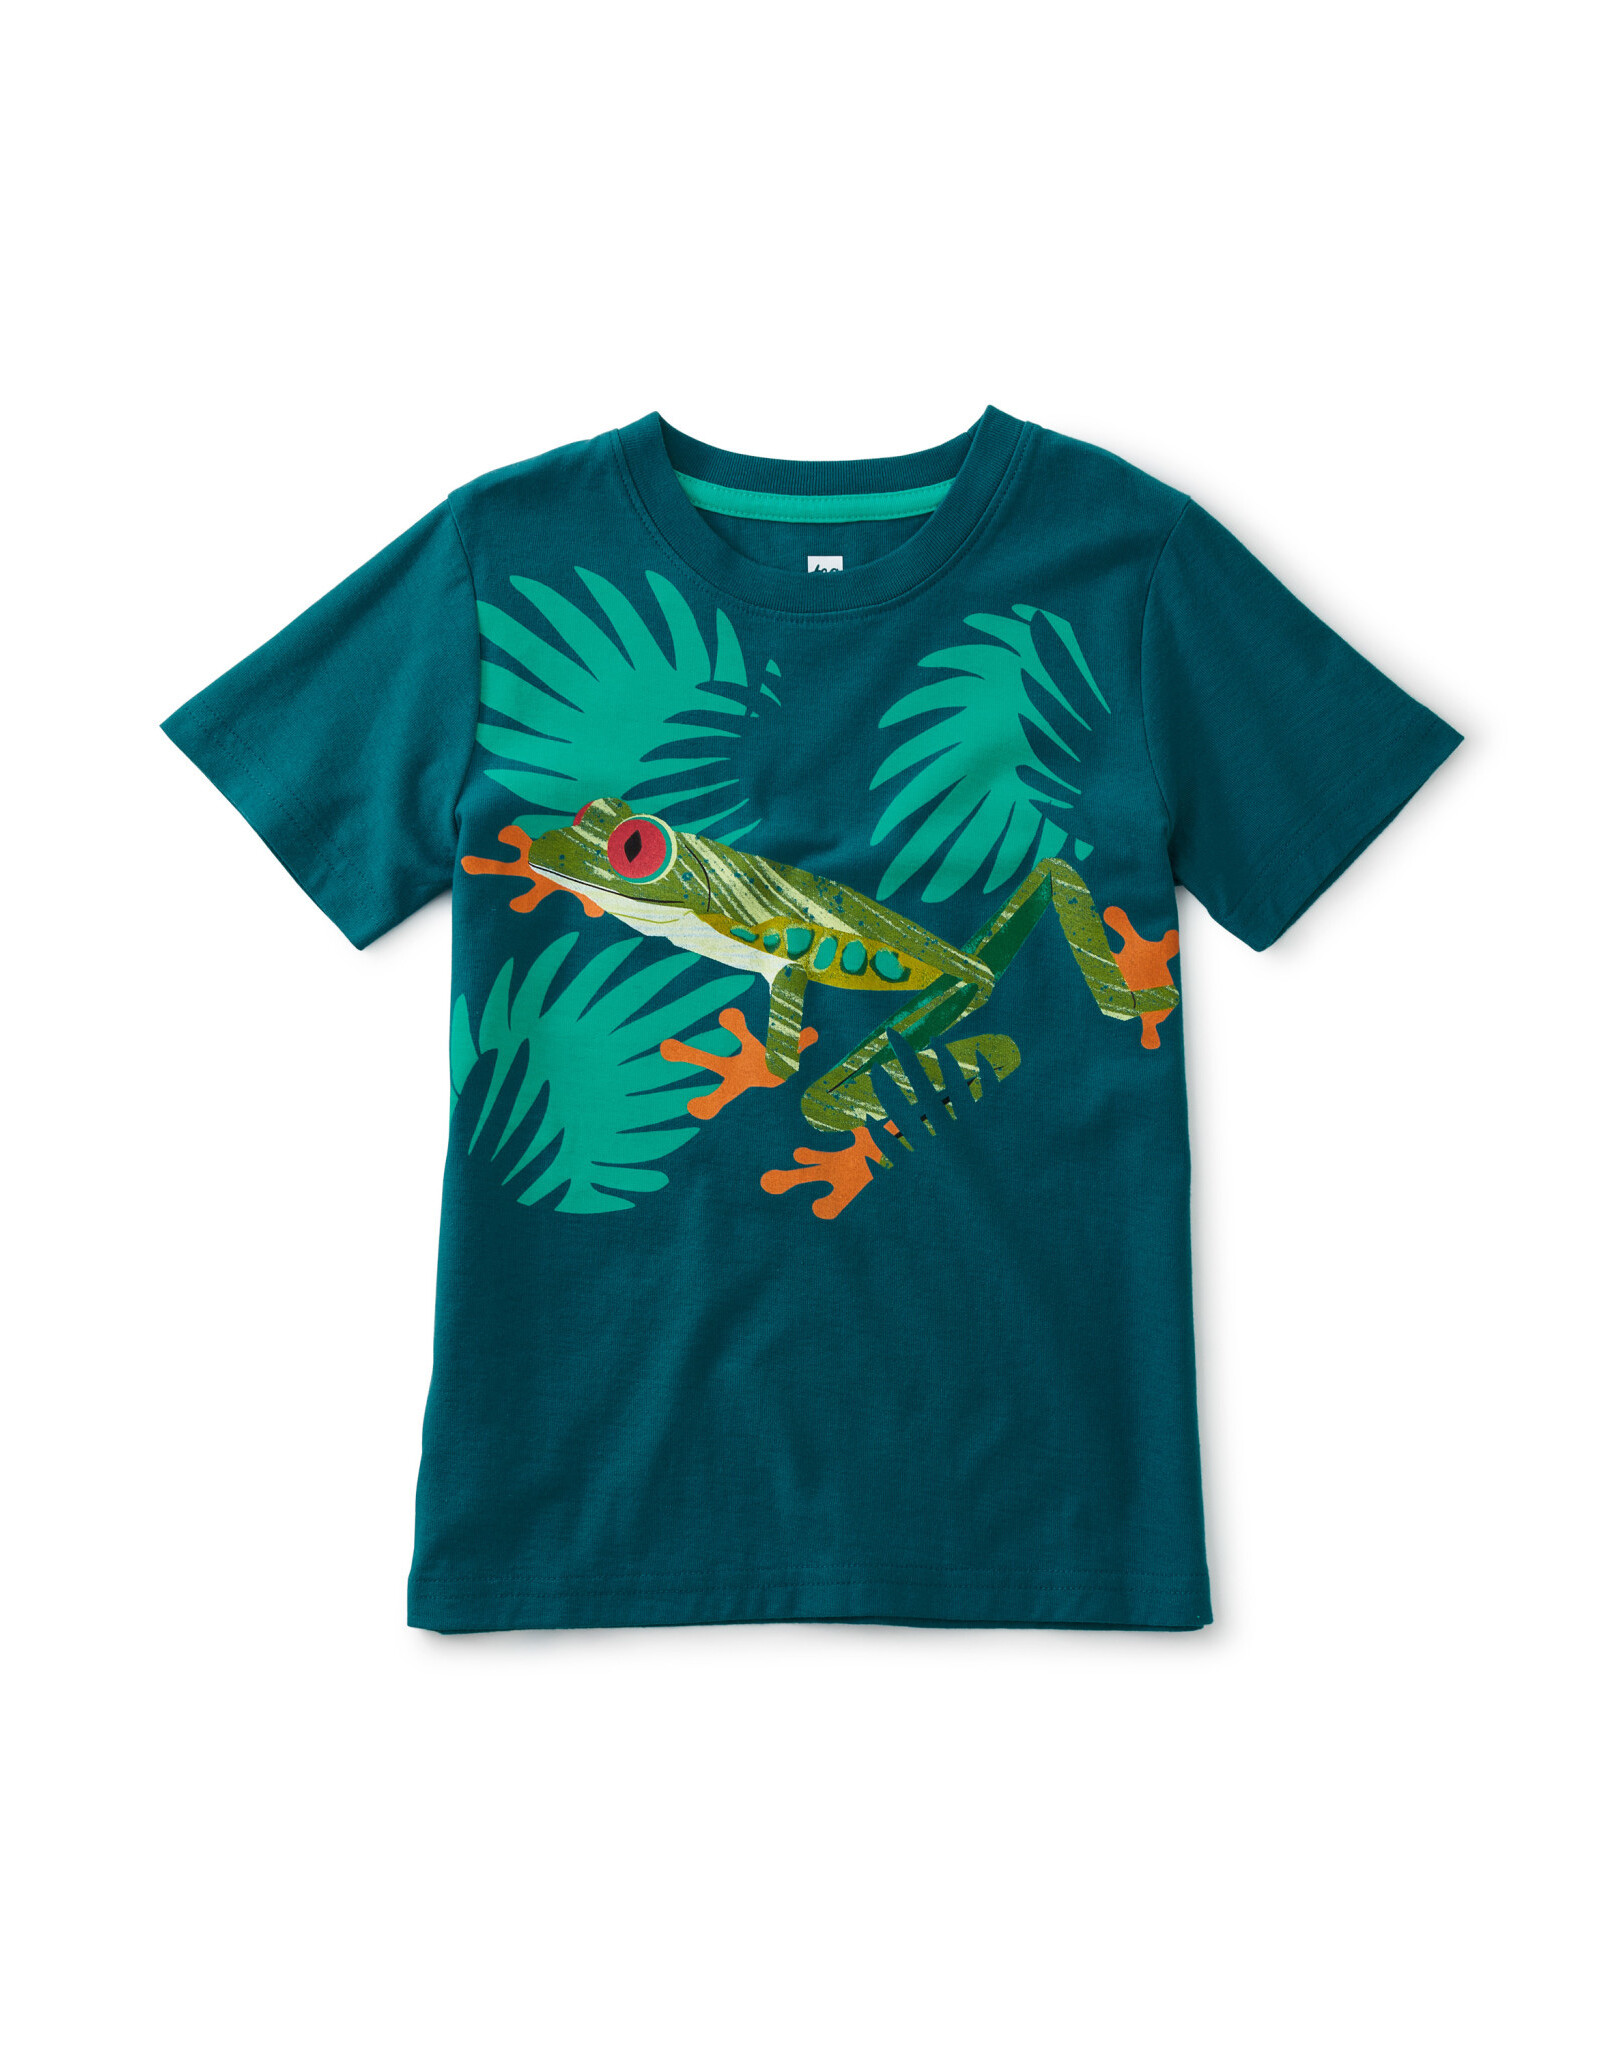 Tea Collection Tree Frog Graphic Tee